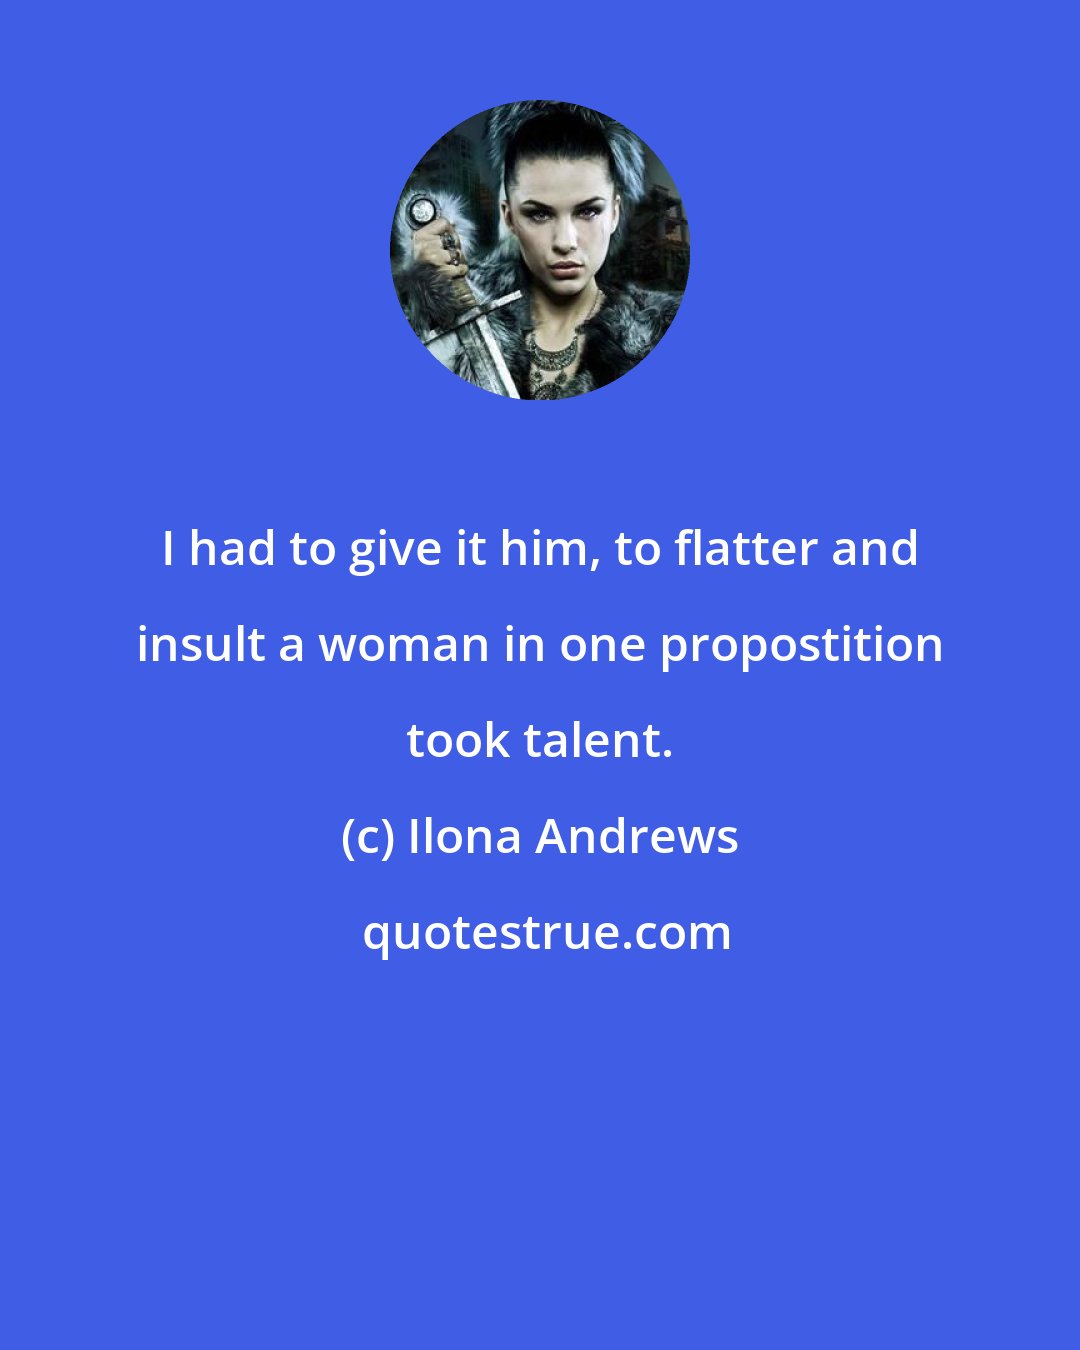 Ilona Andrews: I had to give it him, to flatter and insult a woman in one propostition took talent.